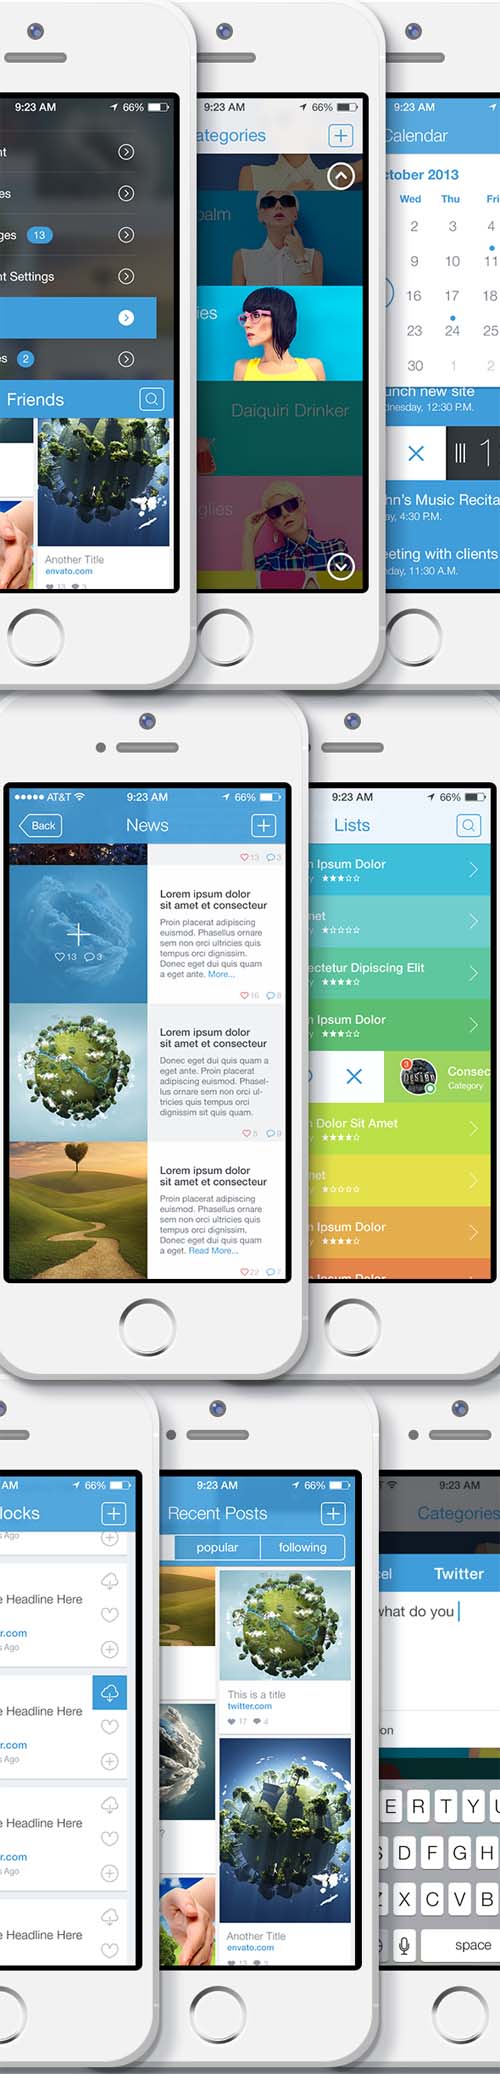 iPhone App Bootstrap 2 iOS 7-8